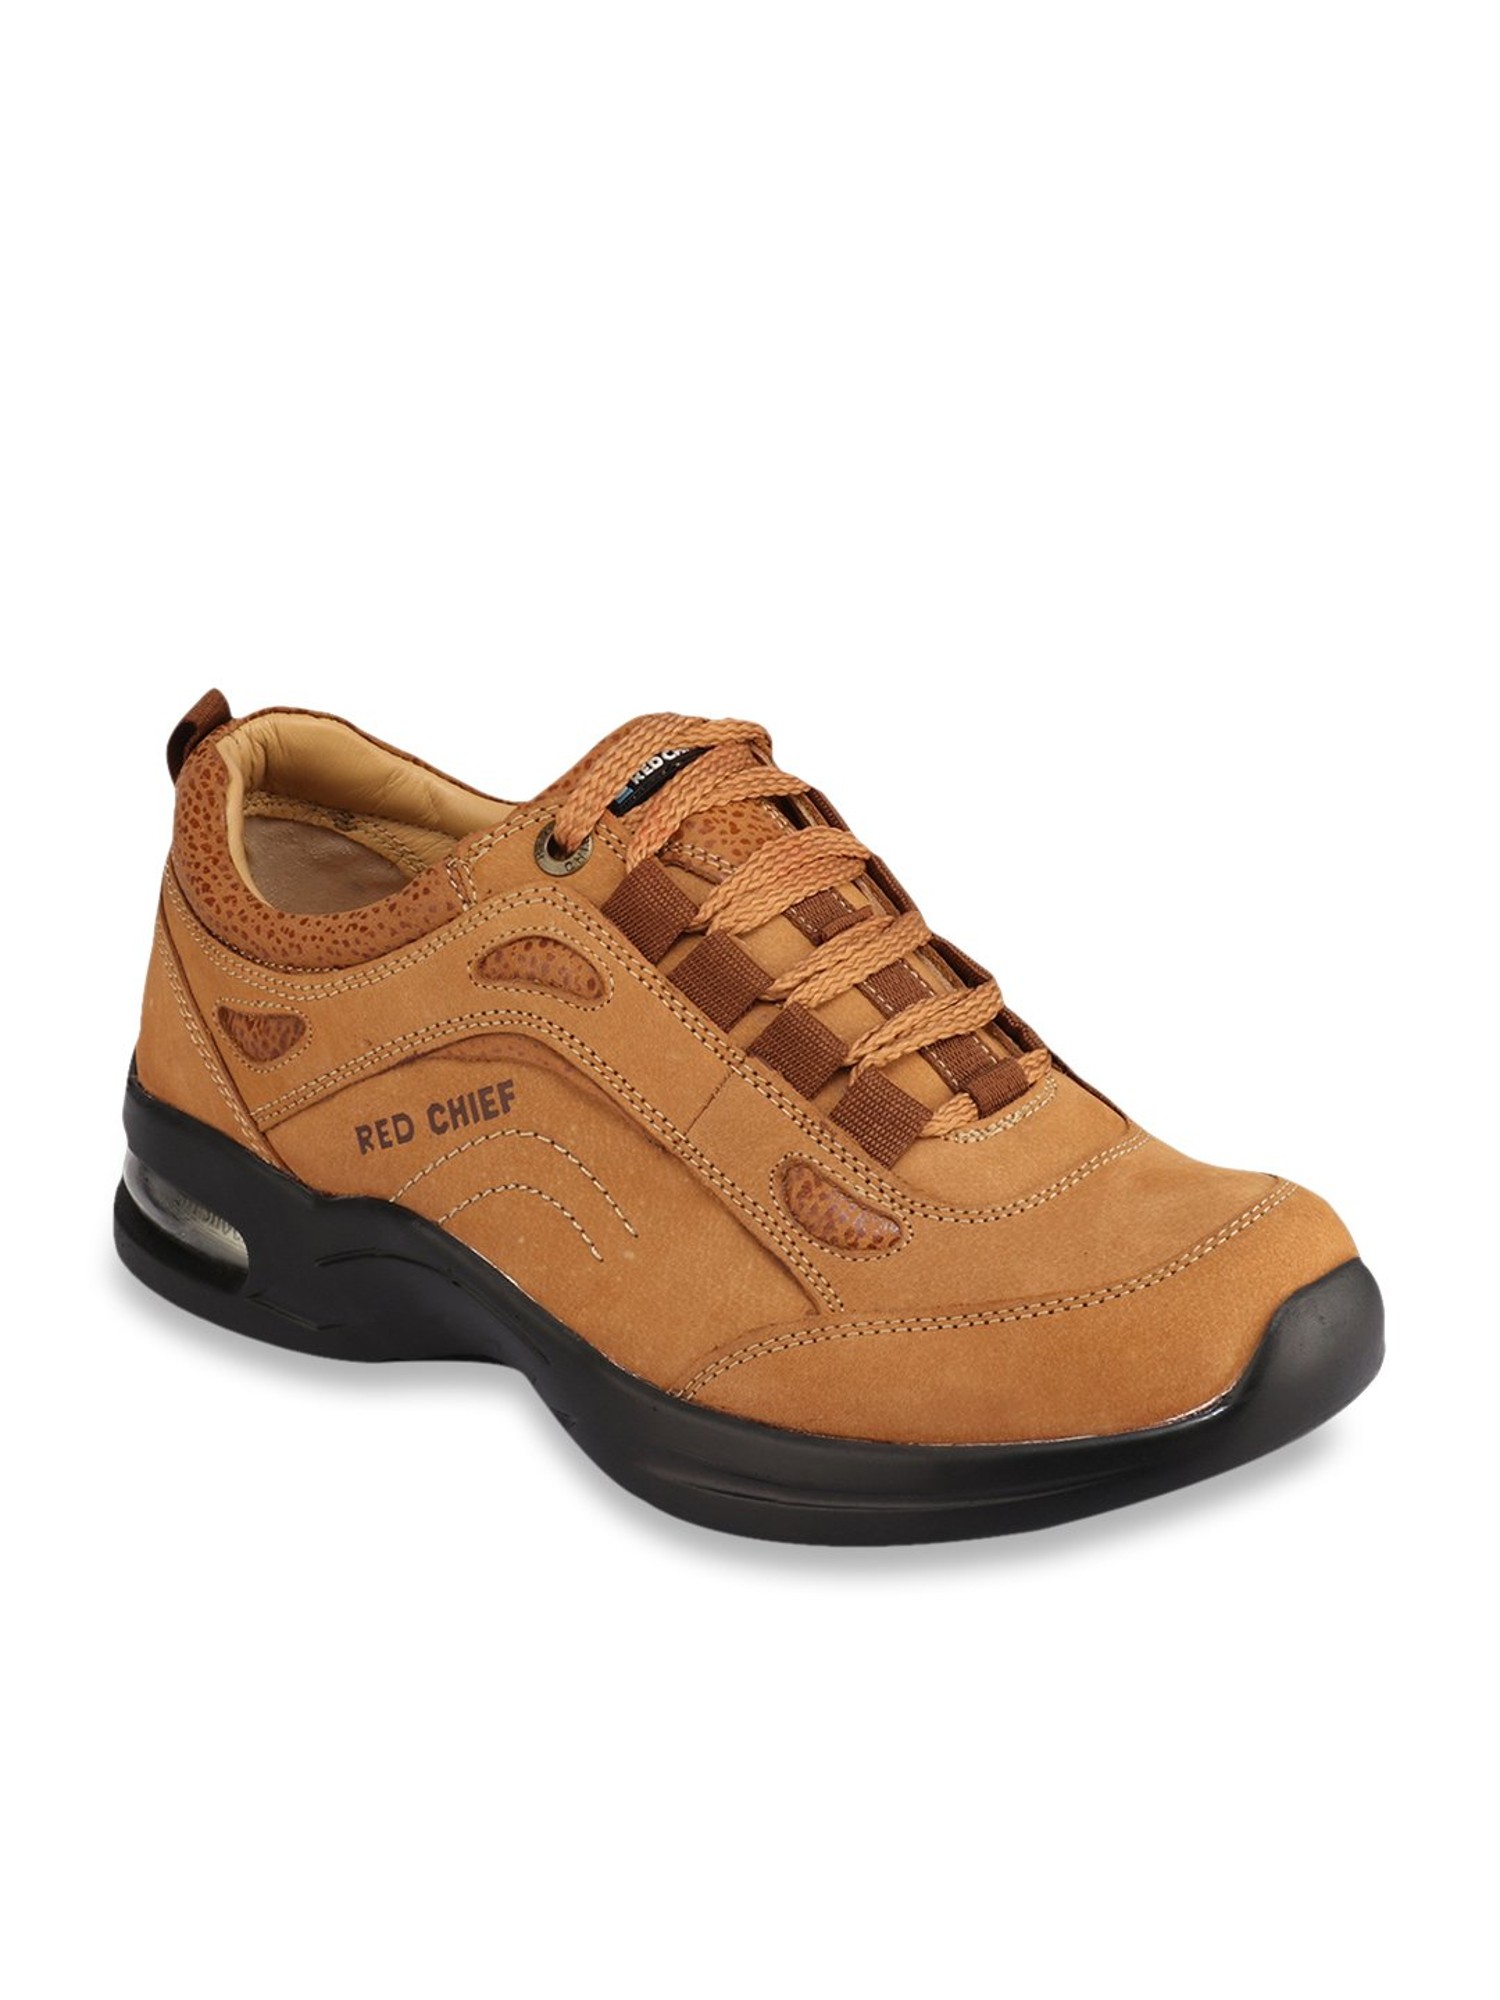 Red Chief Rust Casual Shoes from Red 